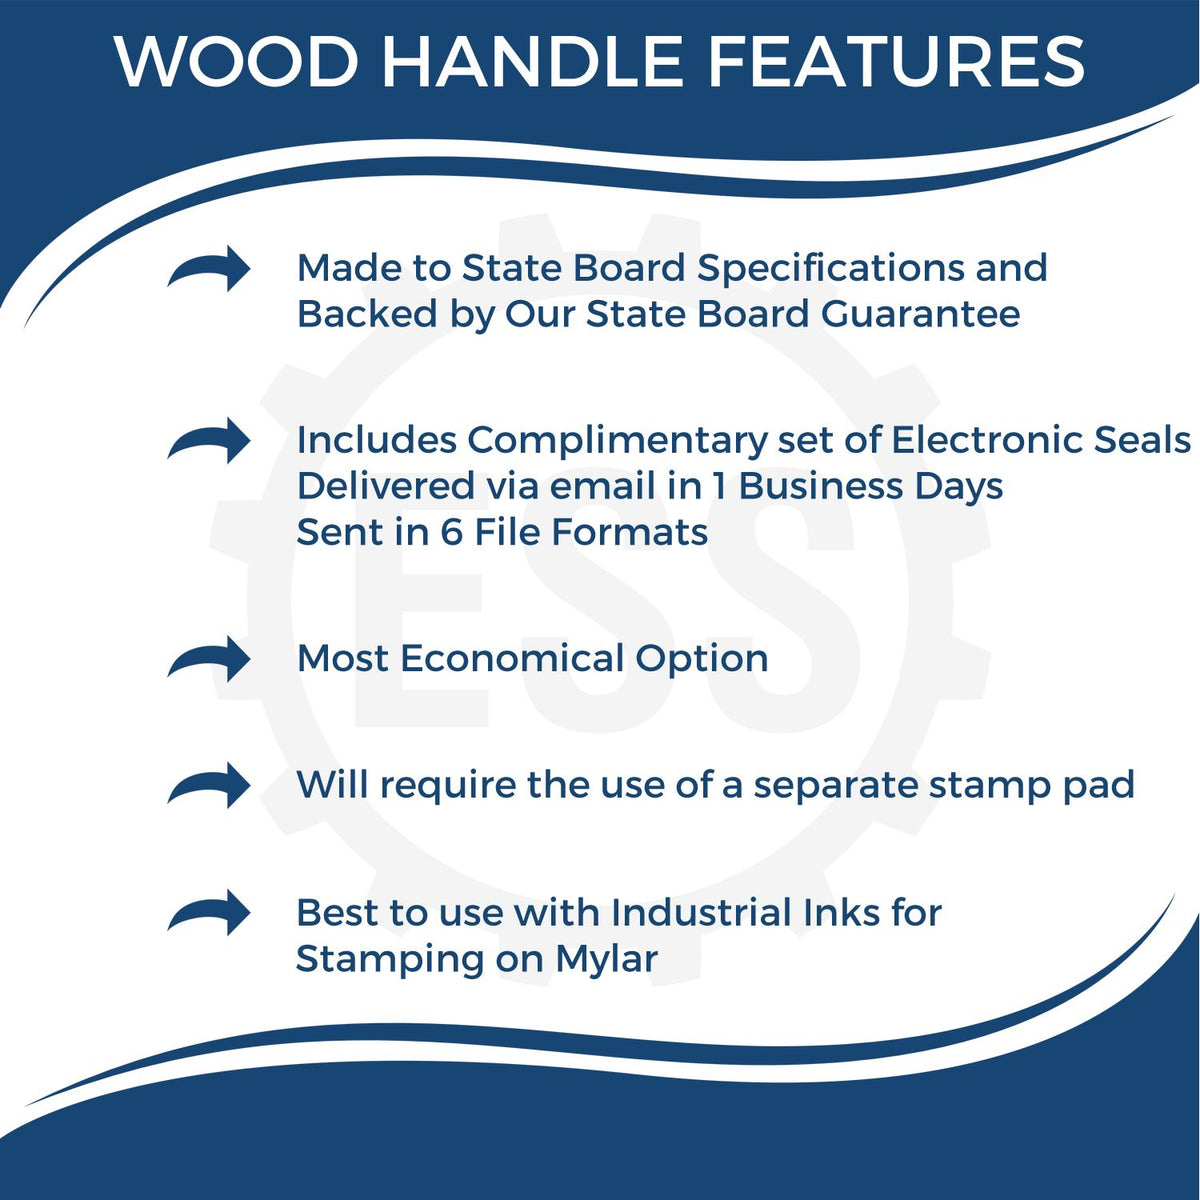 A picture of an infographic highlighting the selling points for the Wooden Handle South Dakota Rectangular Notary Public Stamp